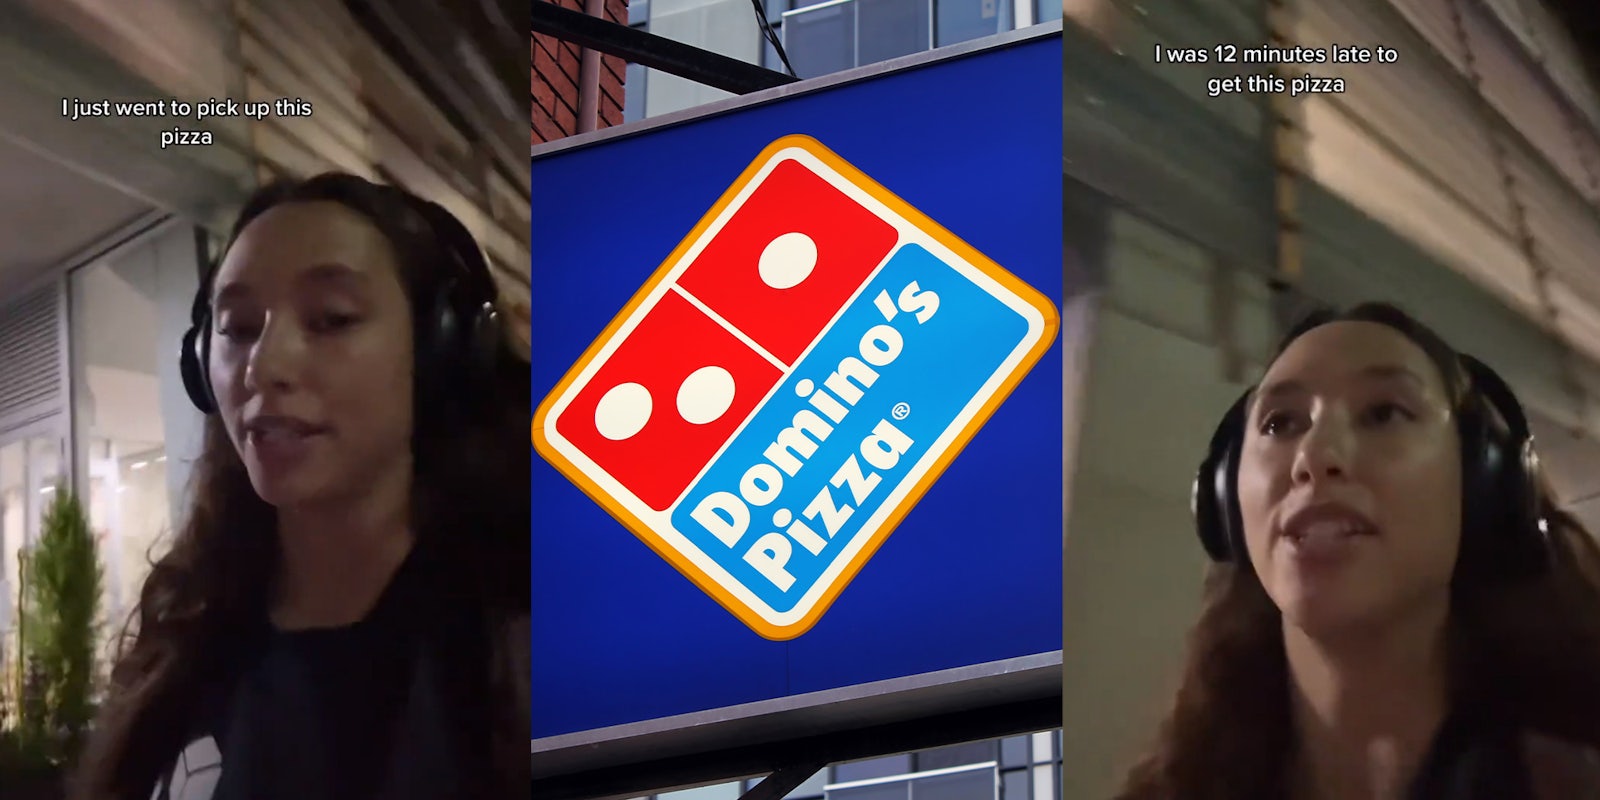 Customer finds Domino's workers eating her pizza when she comes to pick it up